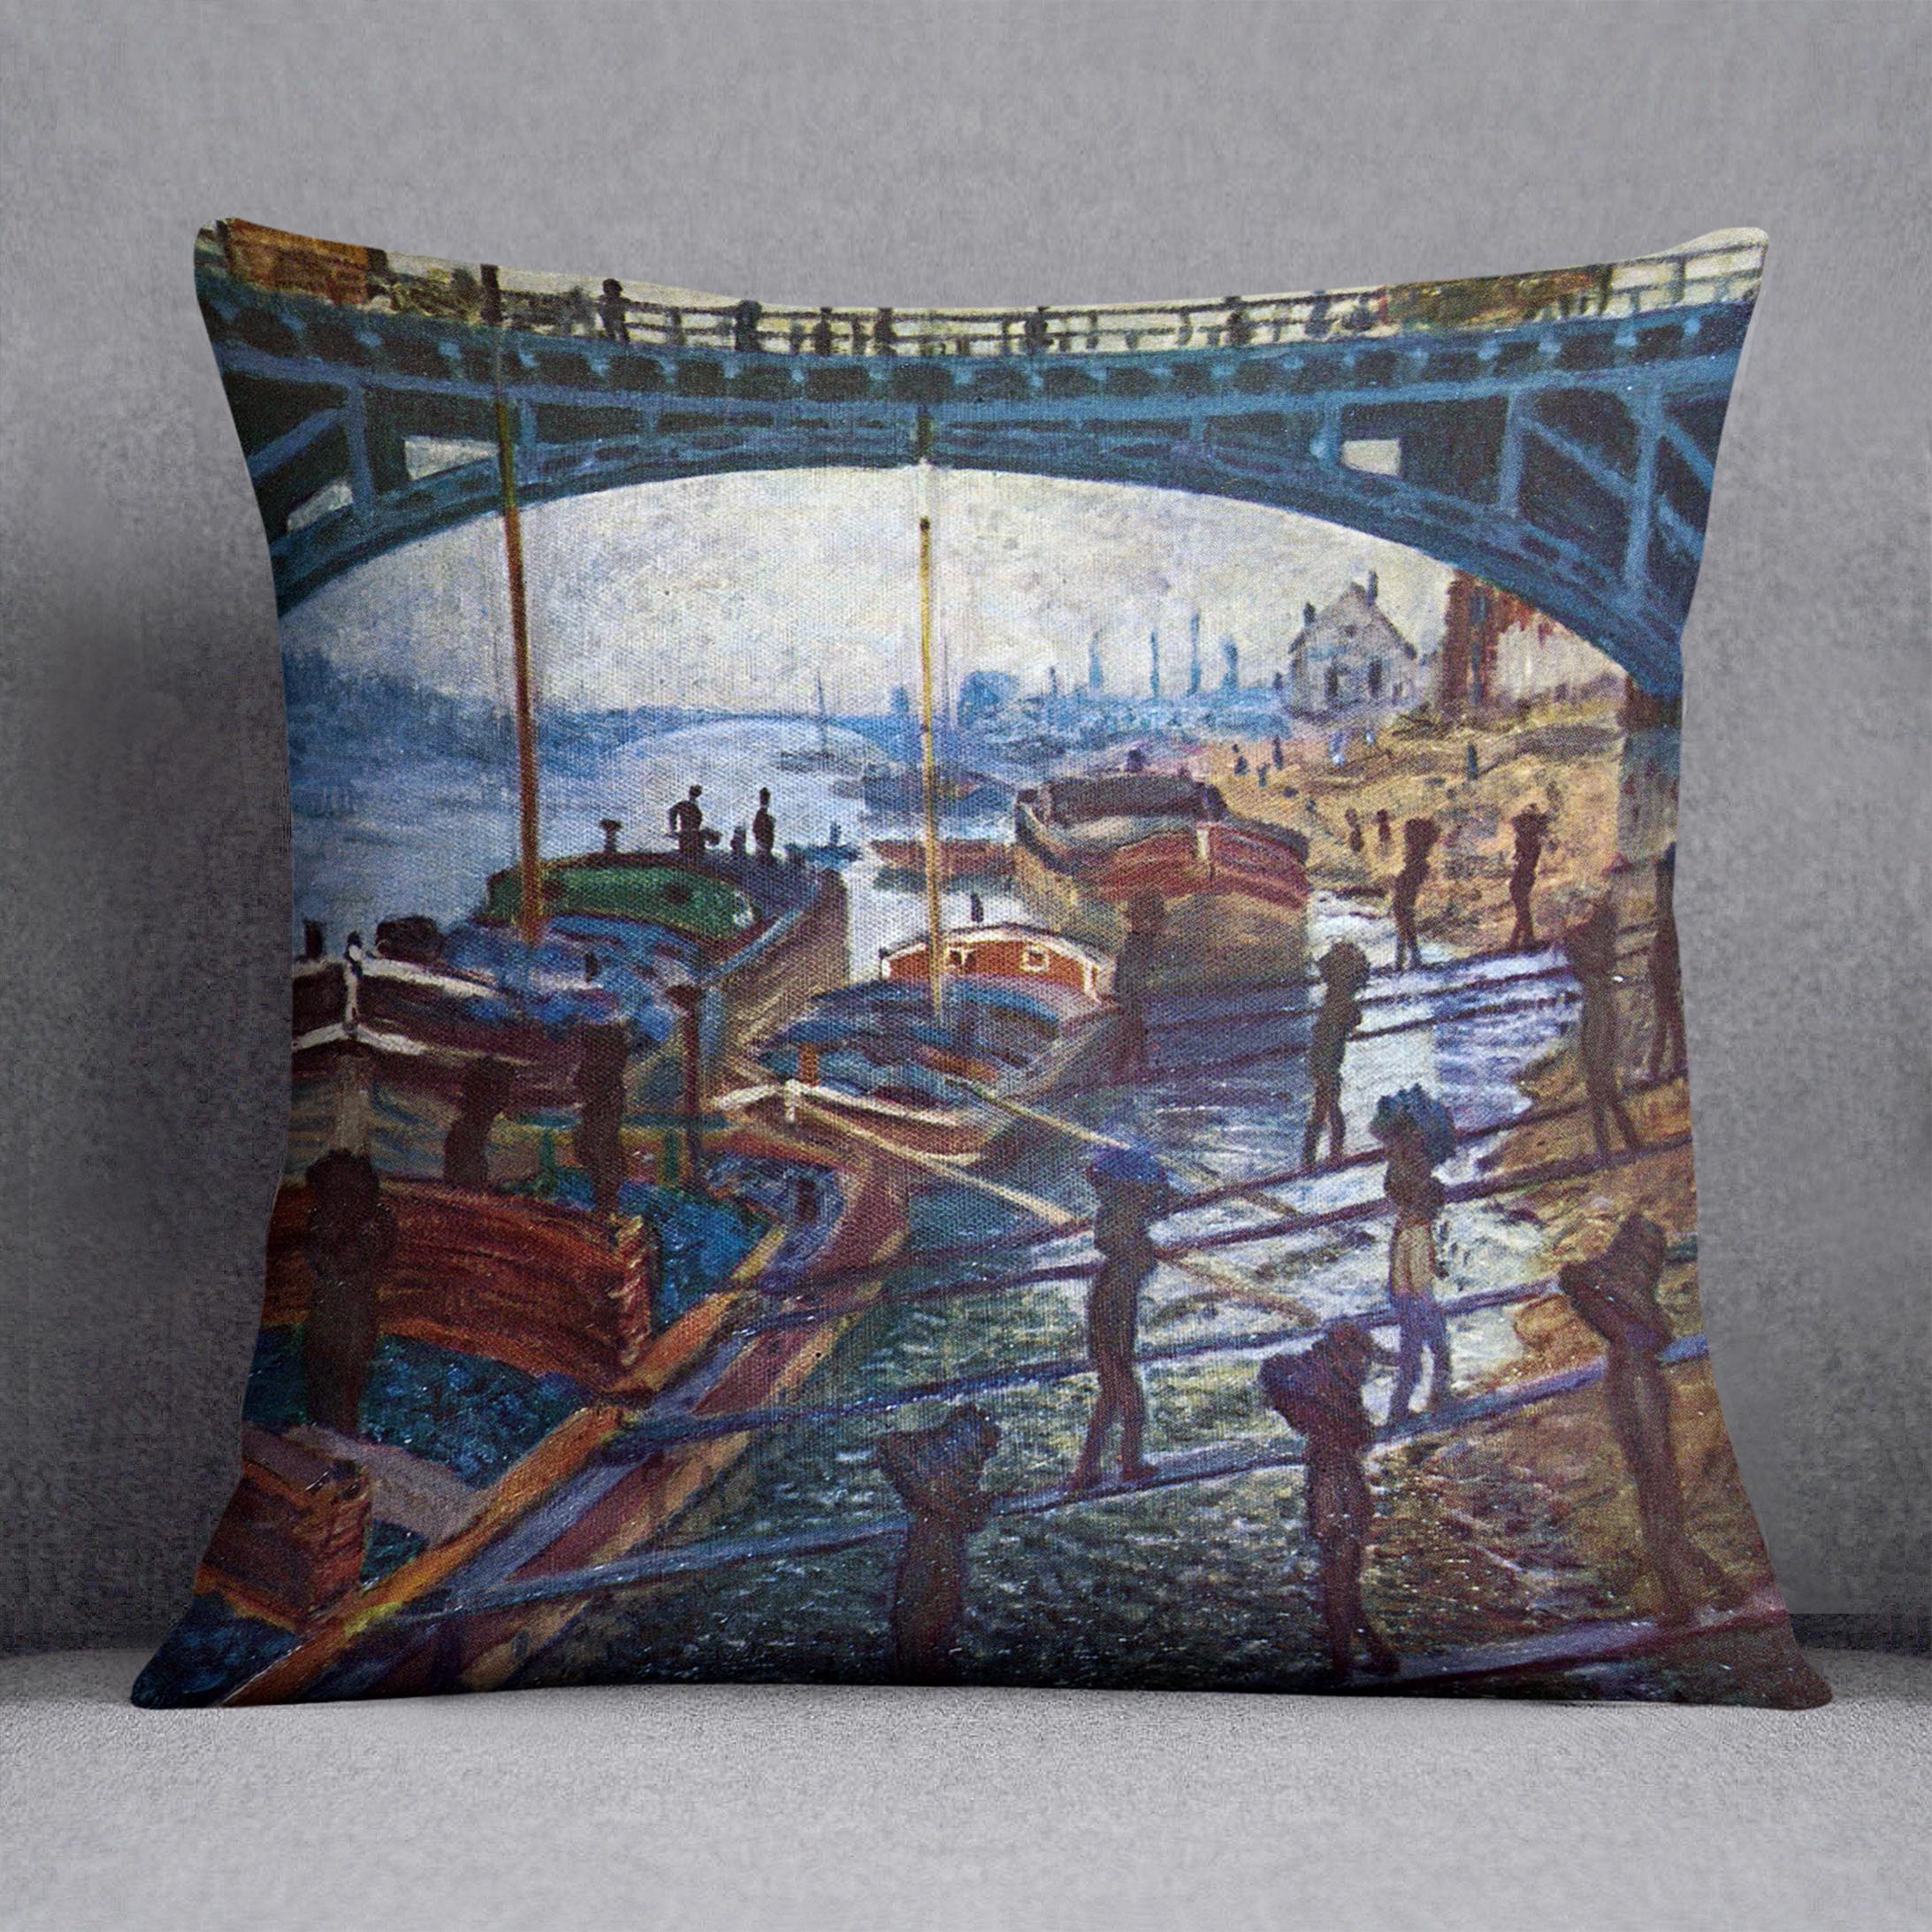 The coal carrier by Monet Cushion